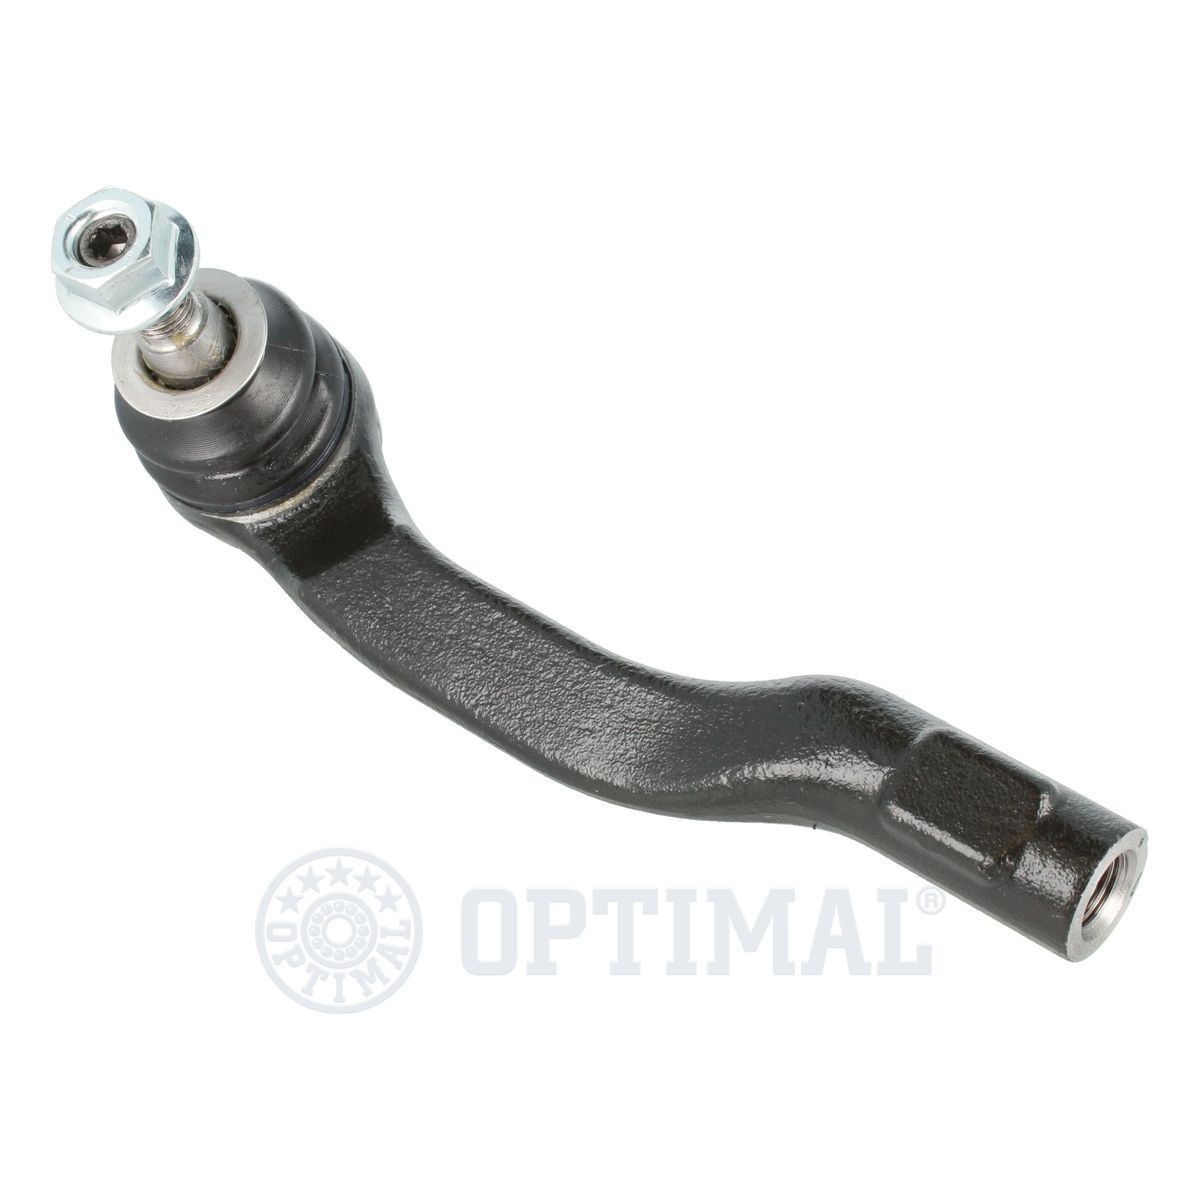 G1-1584 OPTIMAL Tie rod end CITROËN Cone Size 14,2 mm, M12 x 1,50 RHT M mm, Front Axle Left, outer, with self-locking nut